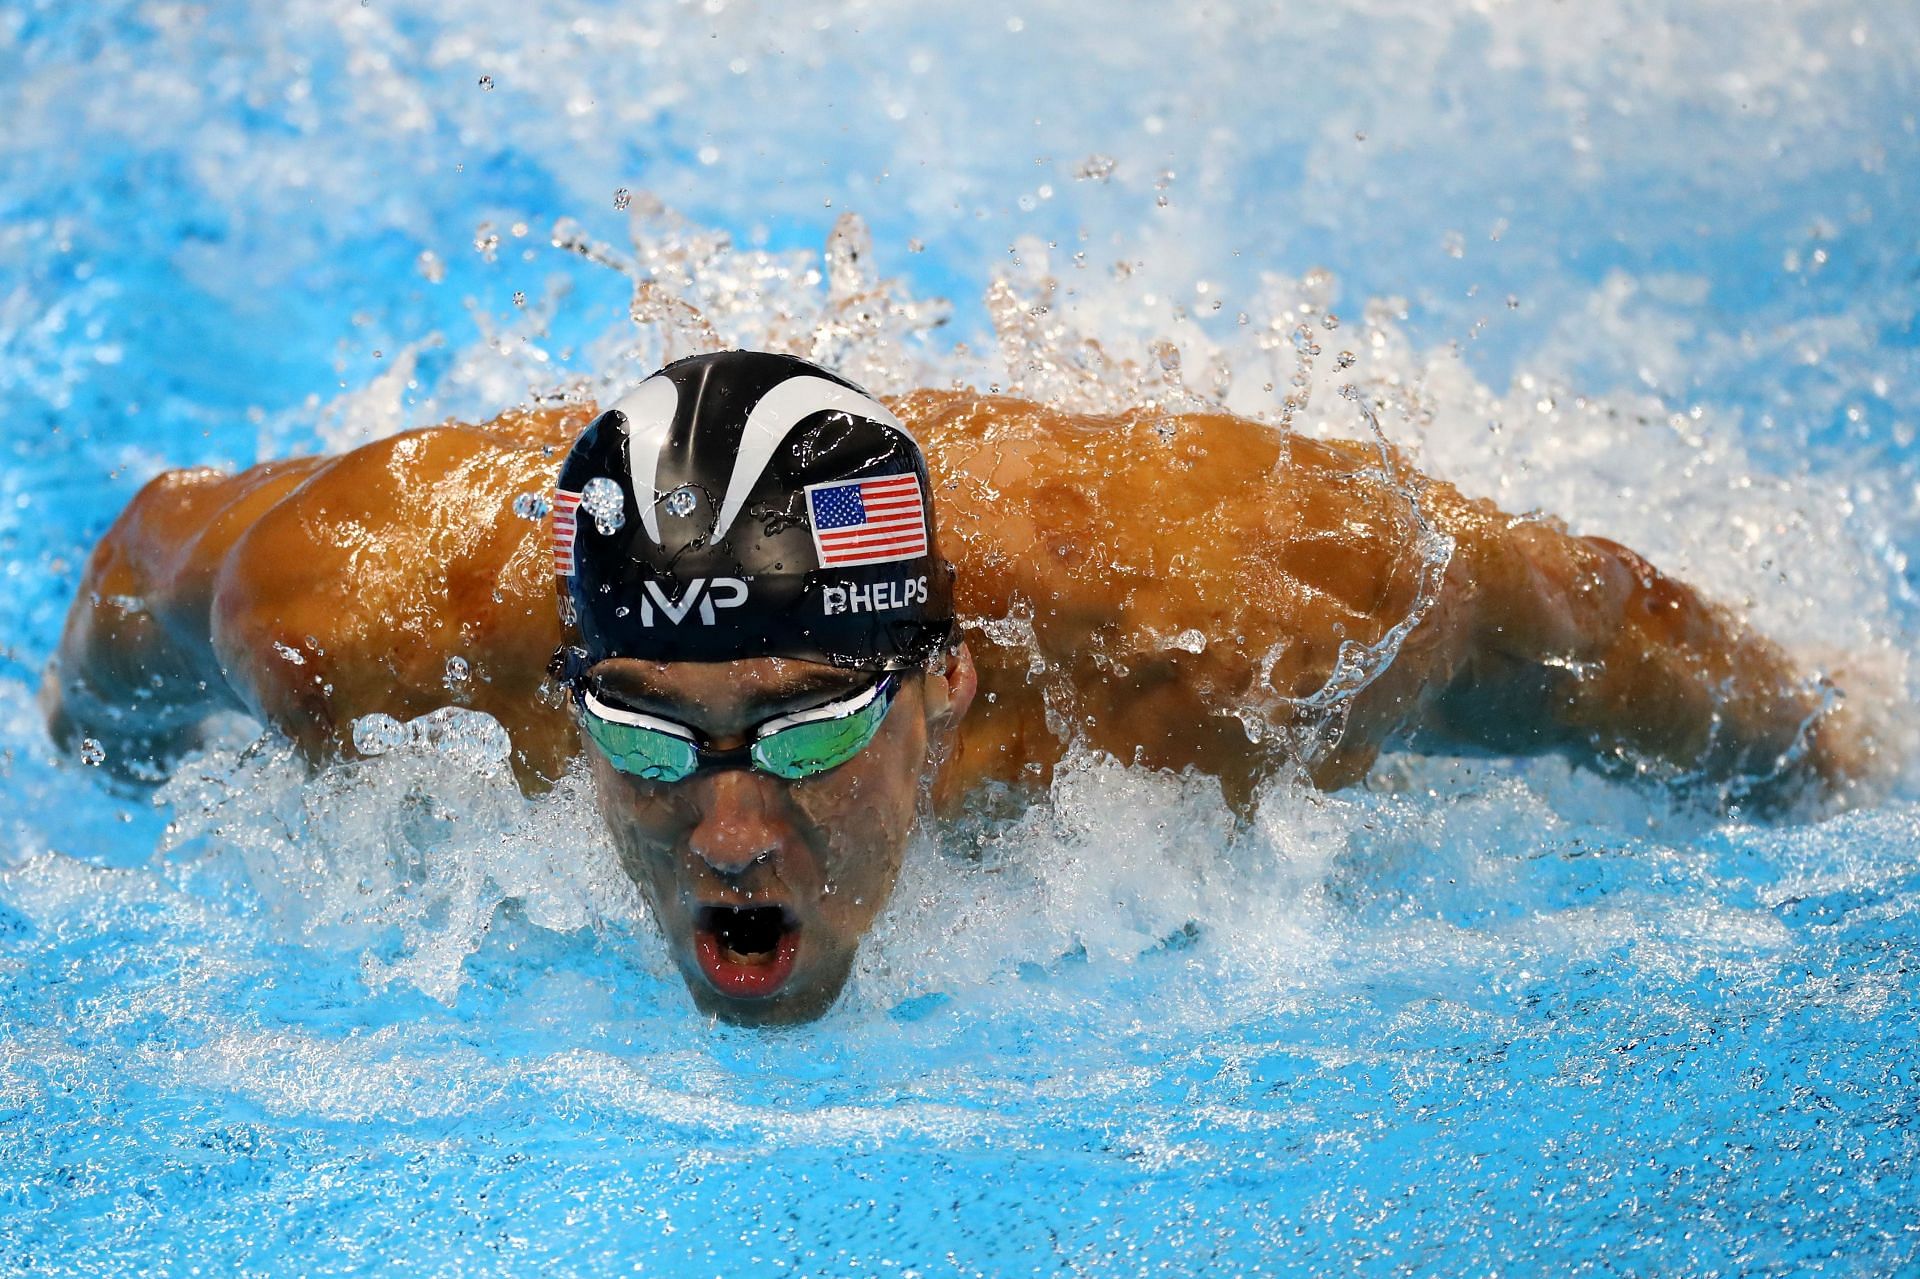 What goggles did Michael Phelps use during swimming?